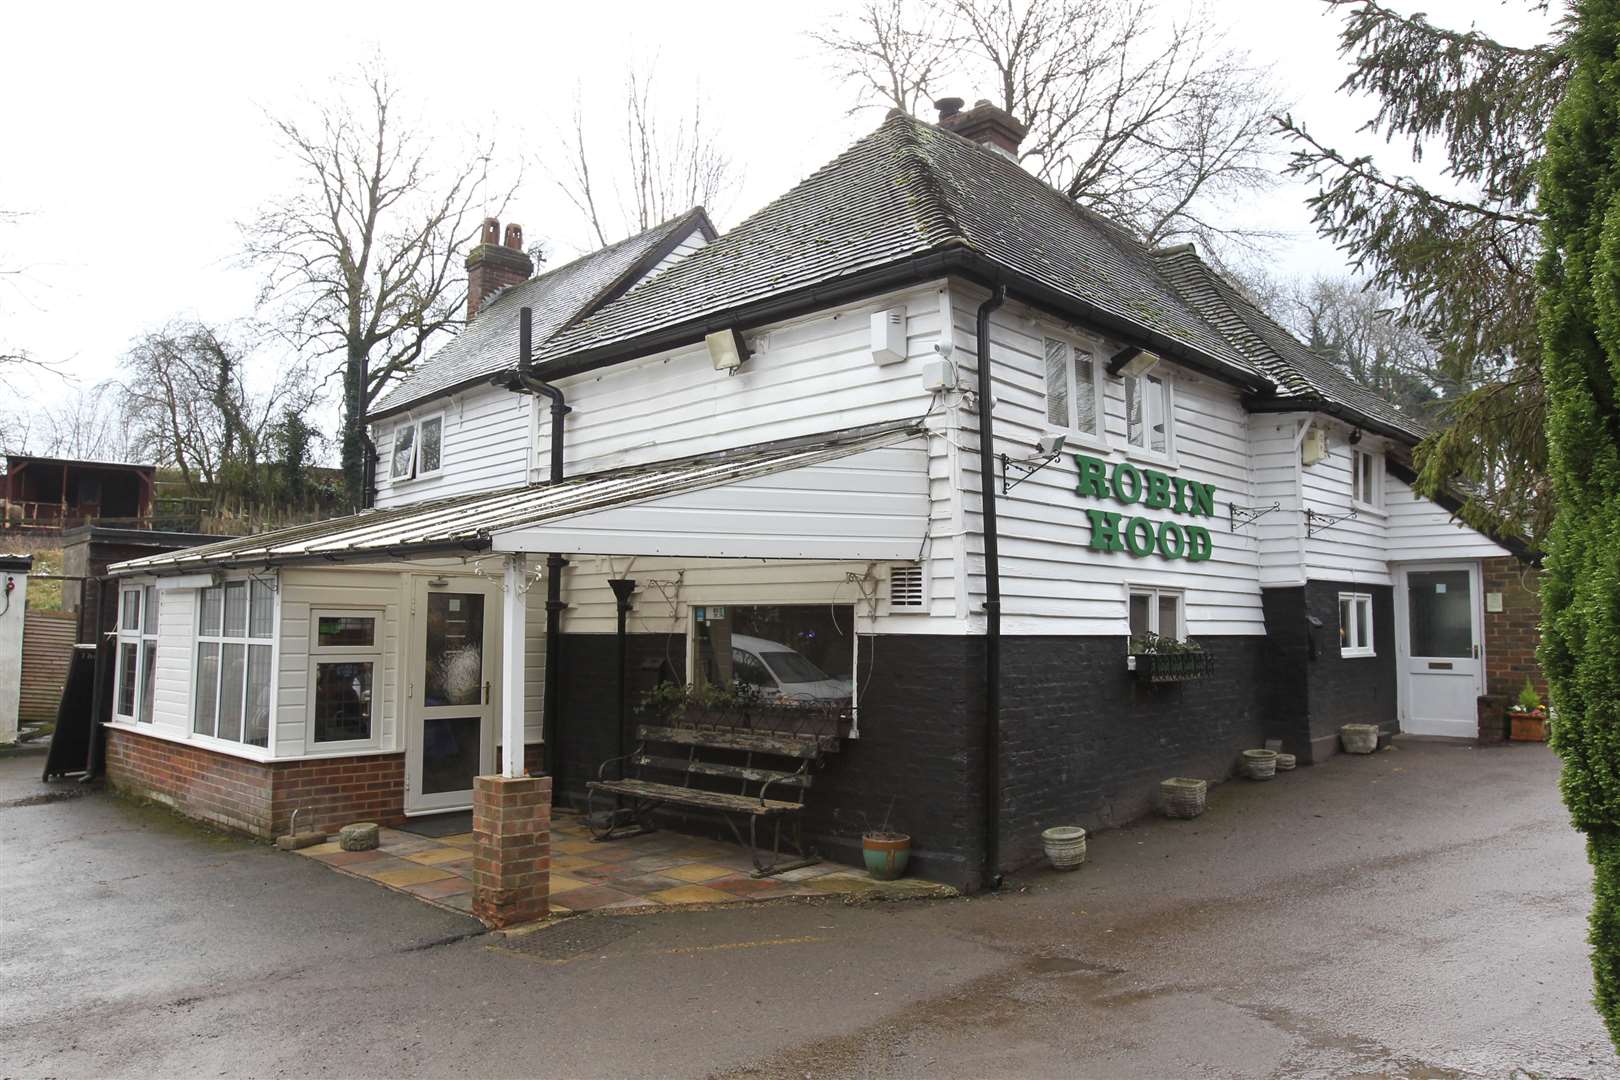 The Robin Hood pub, Common Road, Blue Bell Hill. Picture: John Westhrop